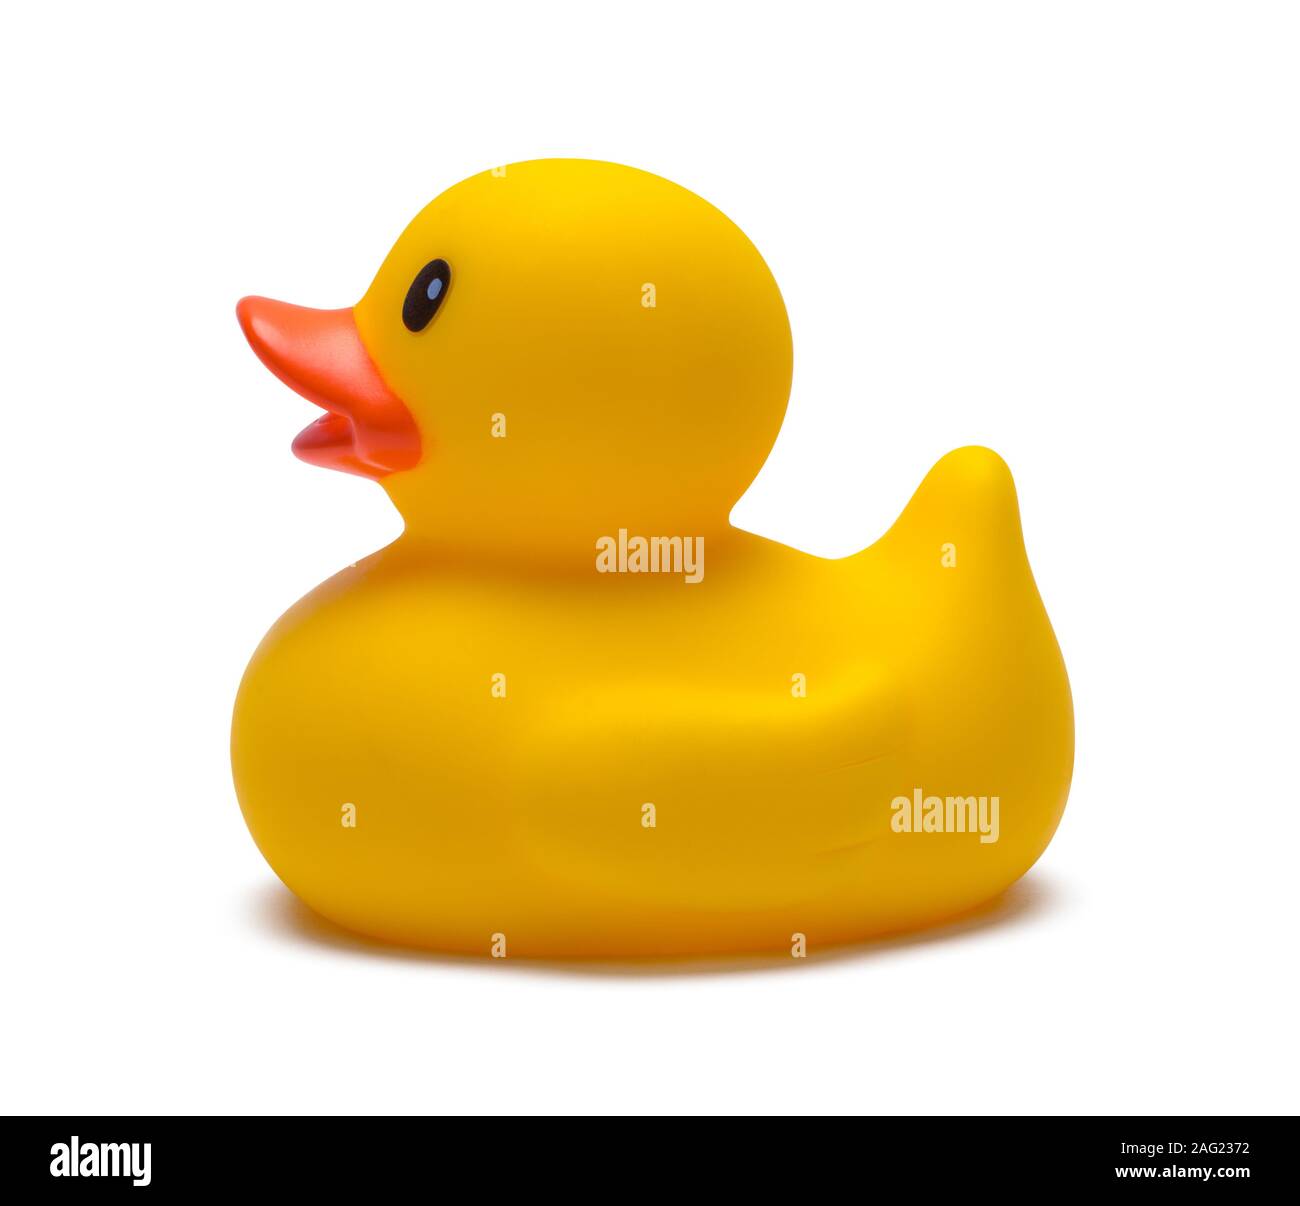 Yellow Rubber Duck Side View Isolated on White. Stock Photo